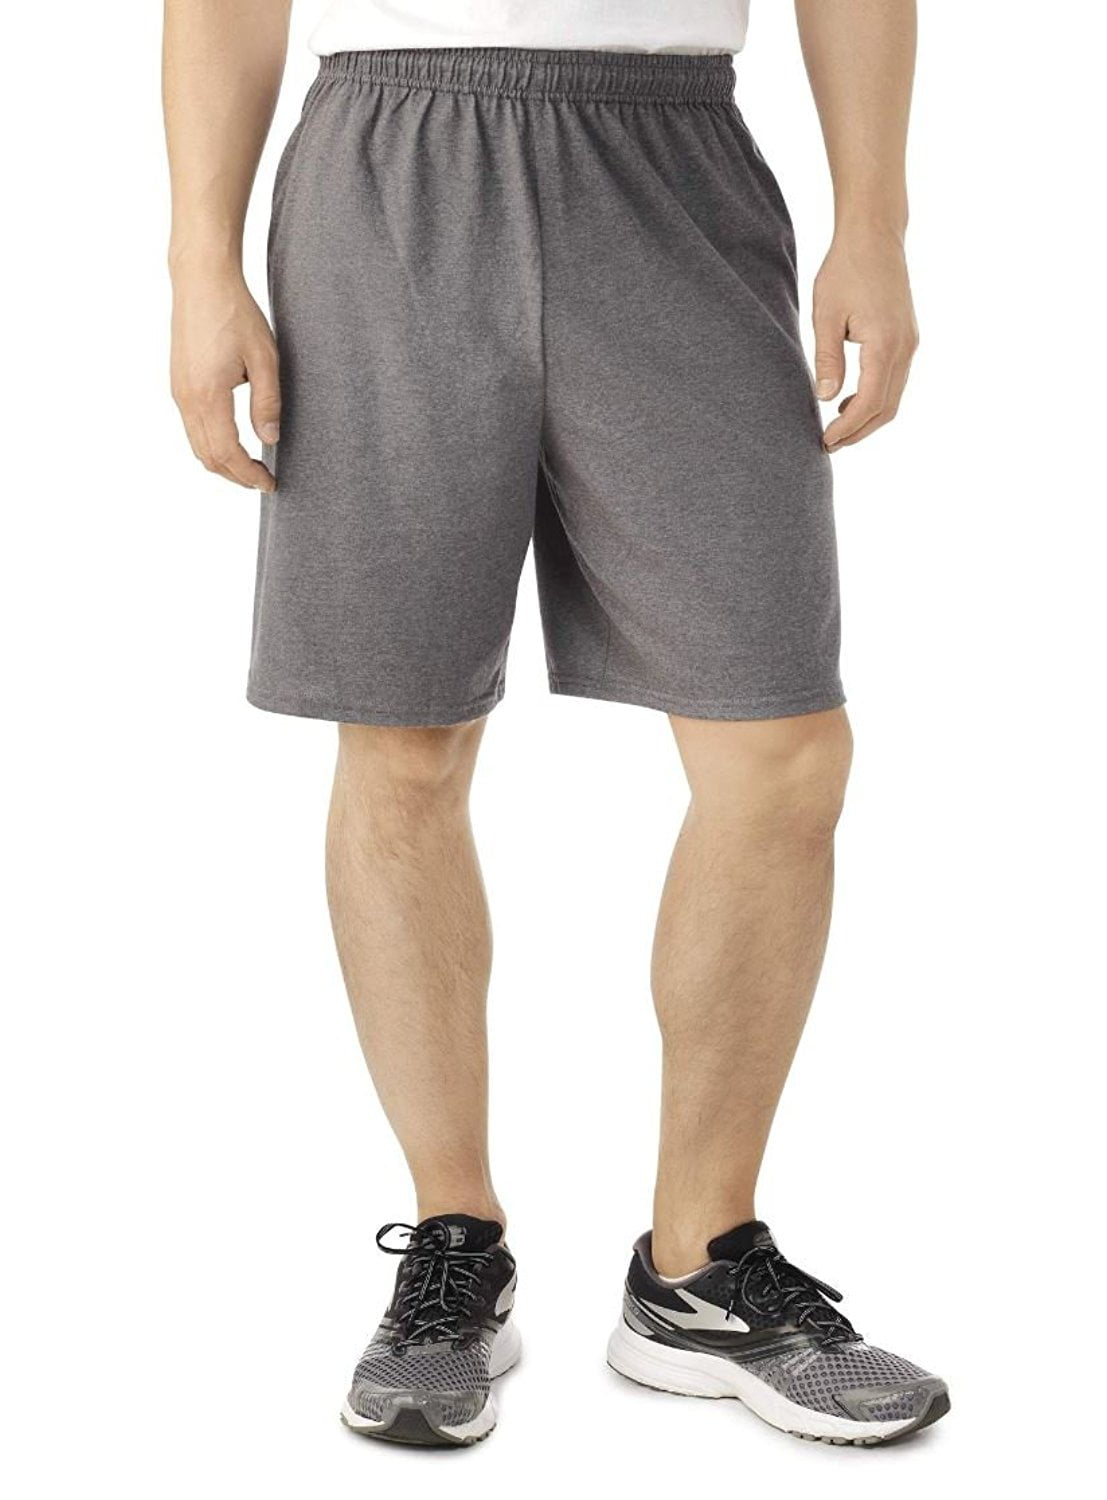 fruit of the loom men's jersey shorts with side pockets